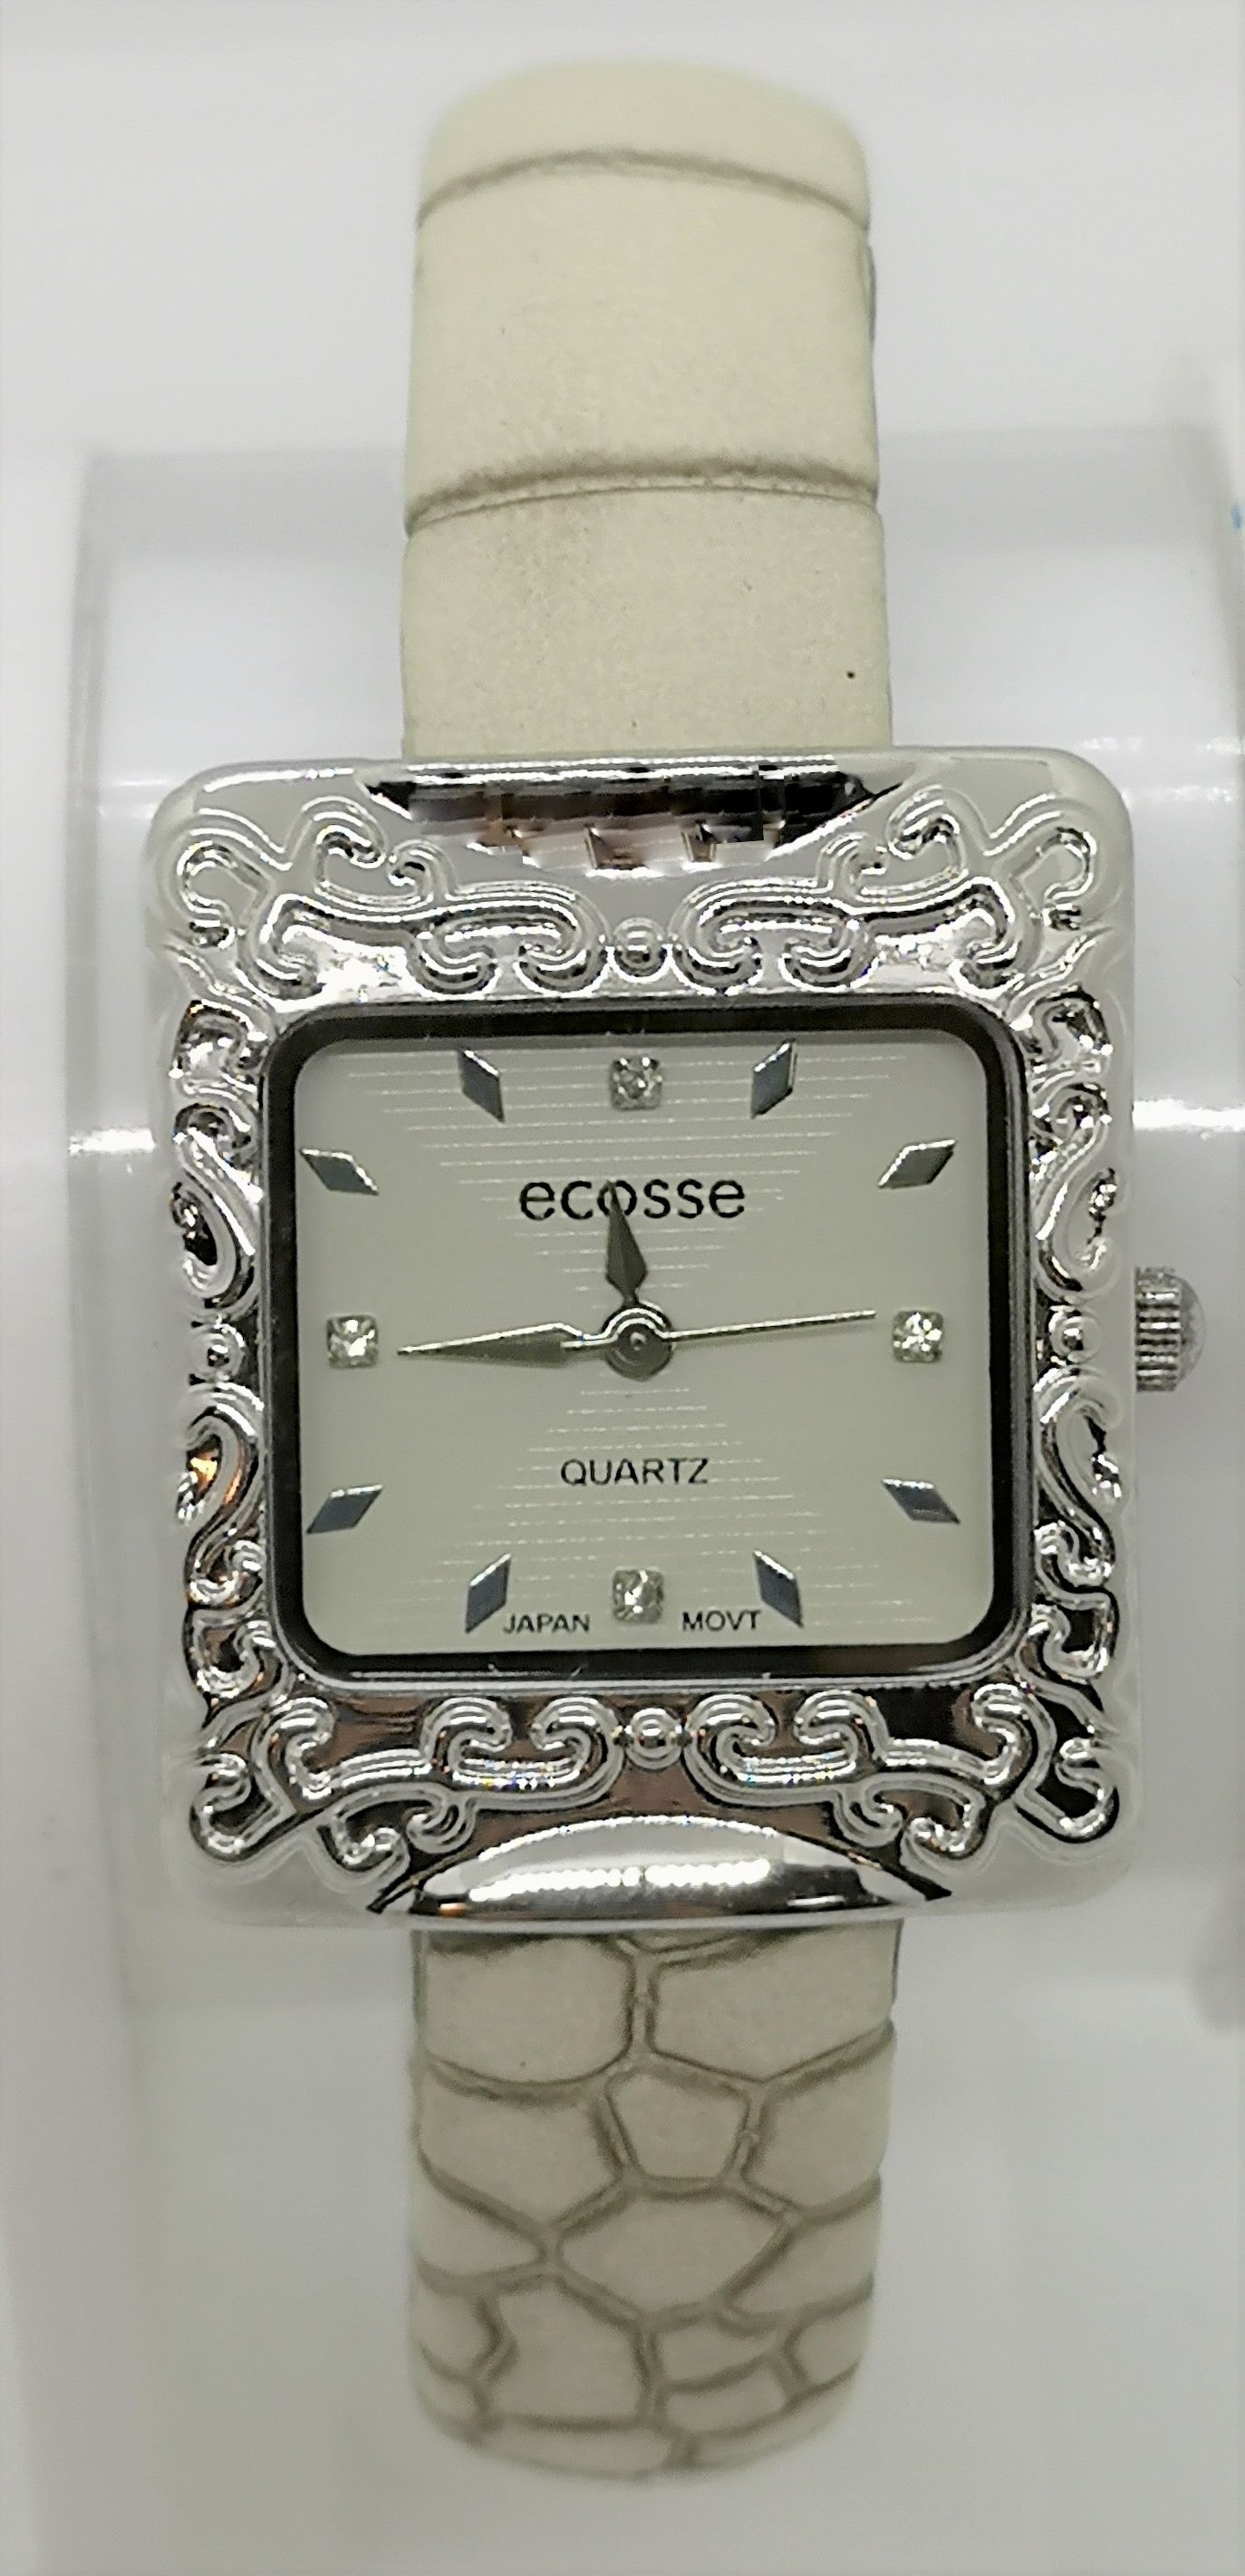 Fashion tan bangle style watch with square face